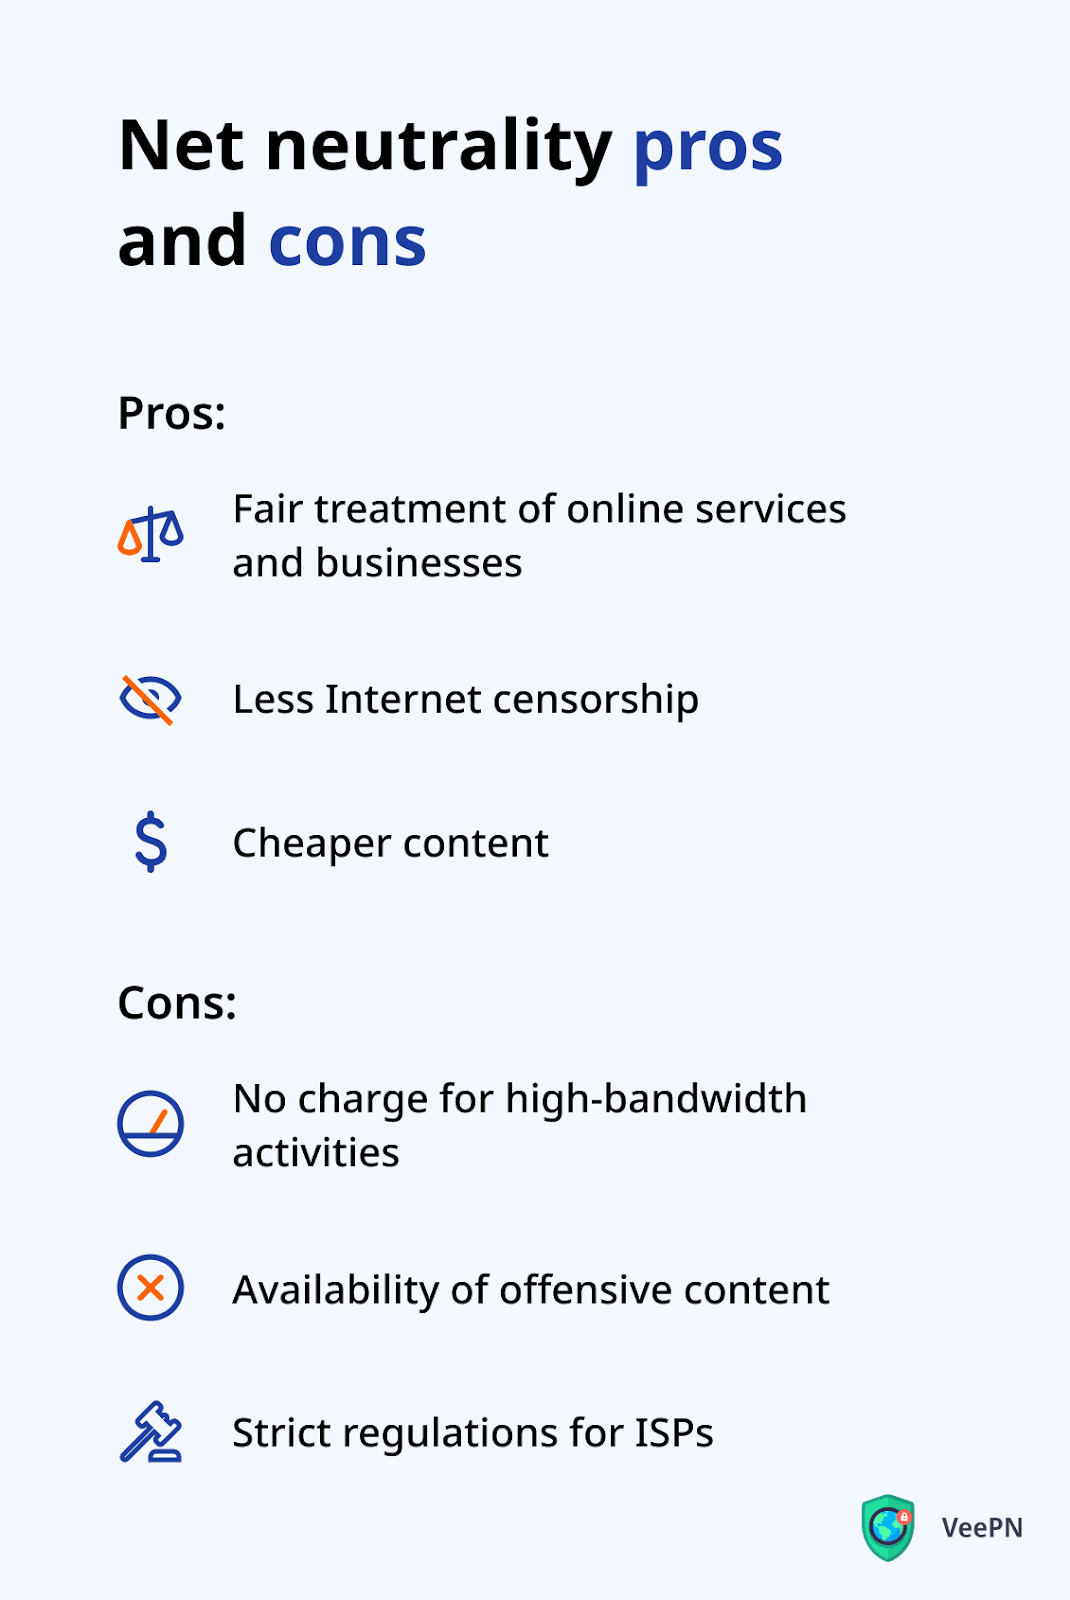 Net neutrality pros and cons